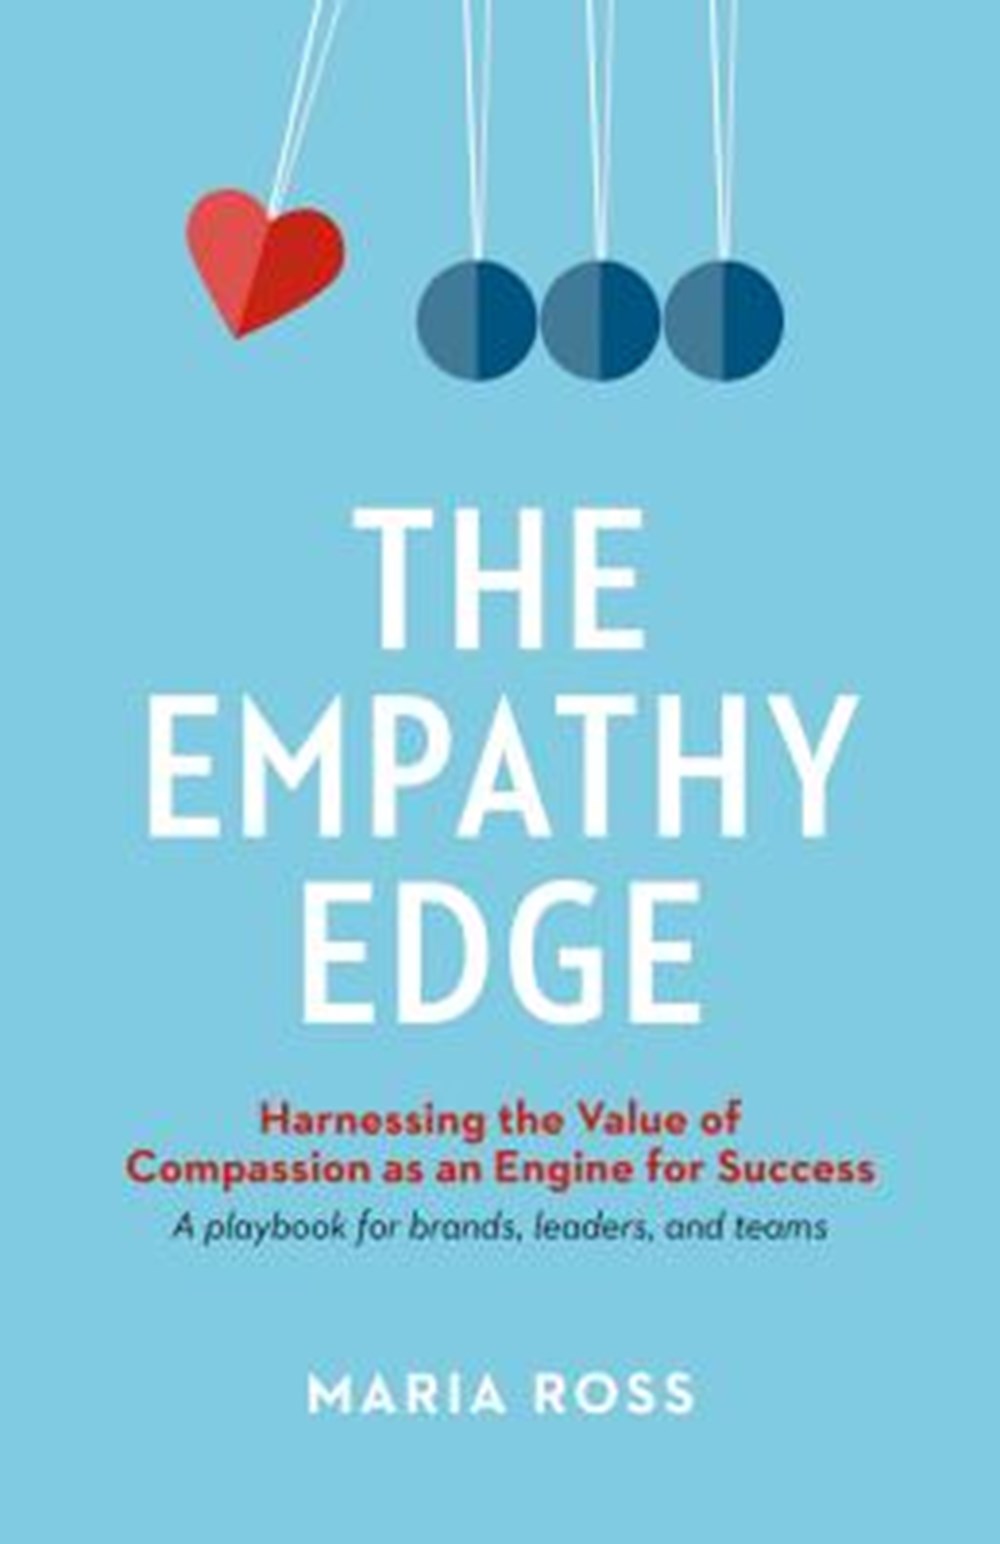 Empathy Edge Harnessing the Value of Compassion as an Engine for Success